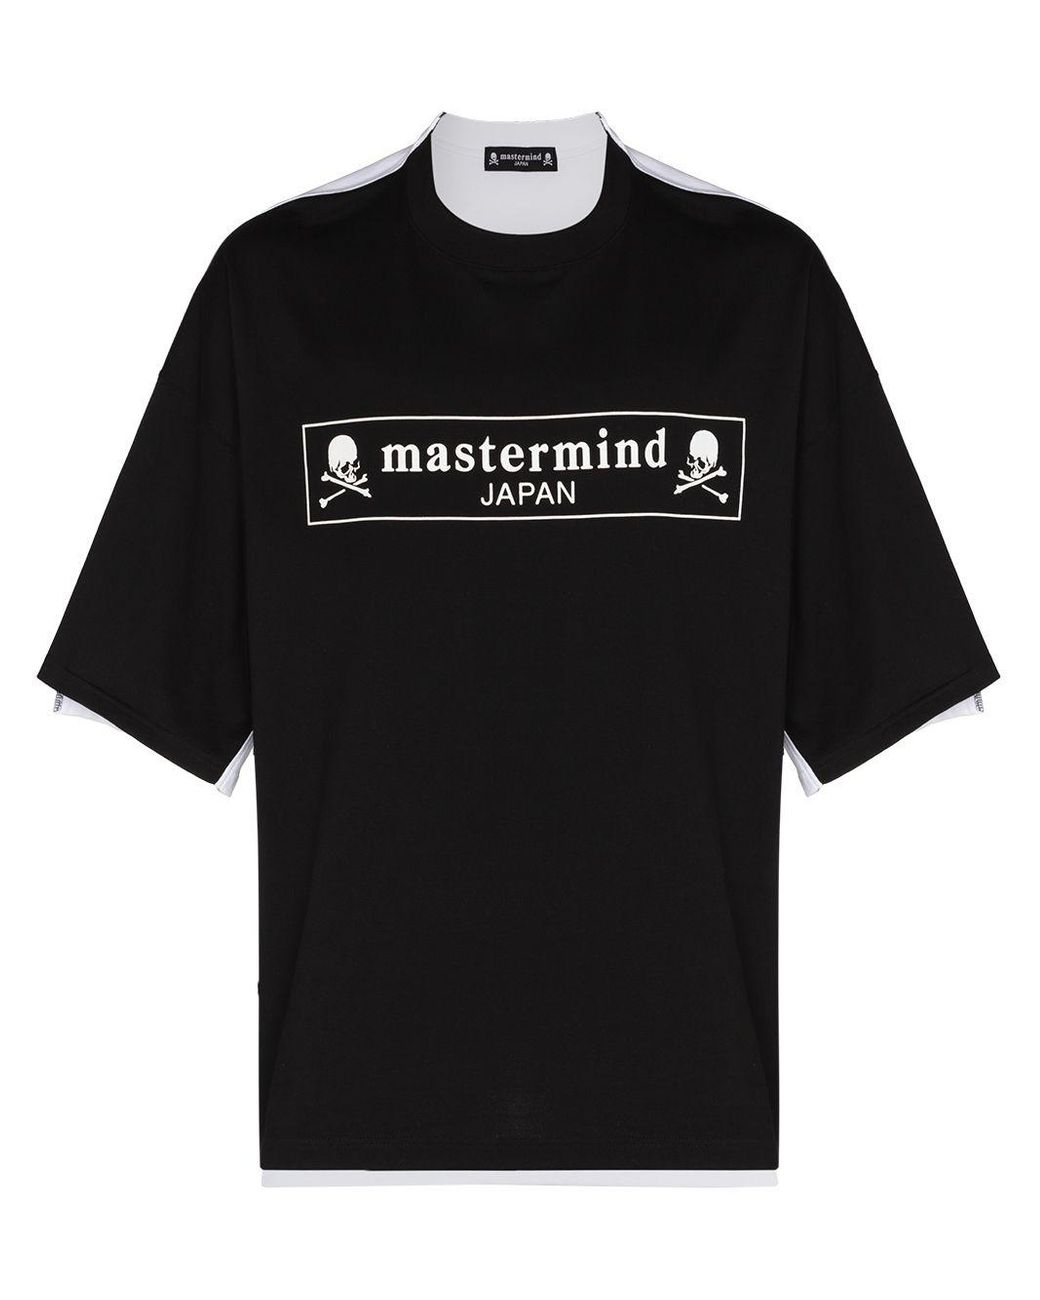 Mastermind Japan Cotton Two-tone Crew Neck T-shirt in Black for Men - Lyst